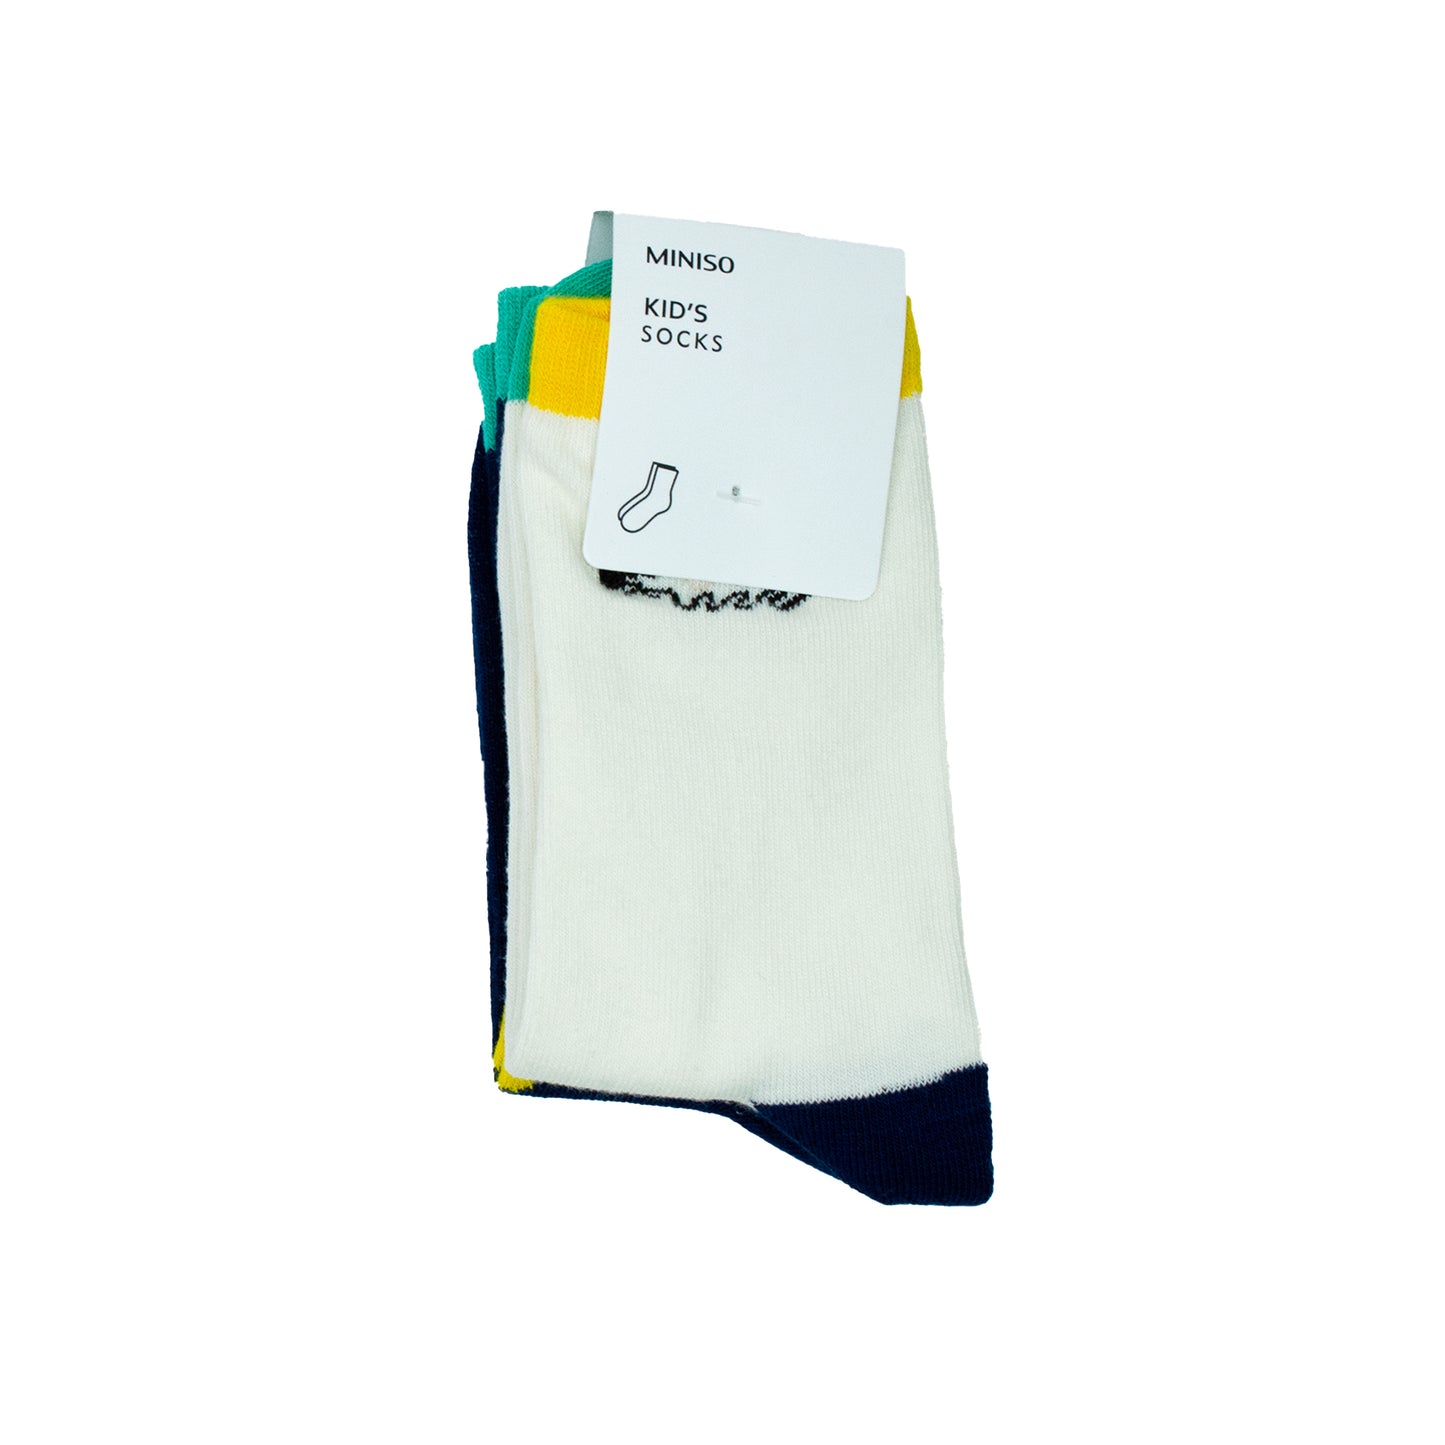 Kids socks pack of 2 KCD-112 size 8 to 10